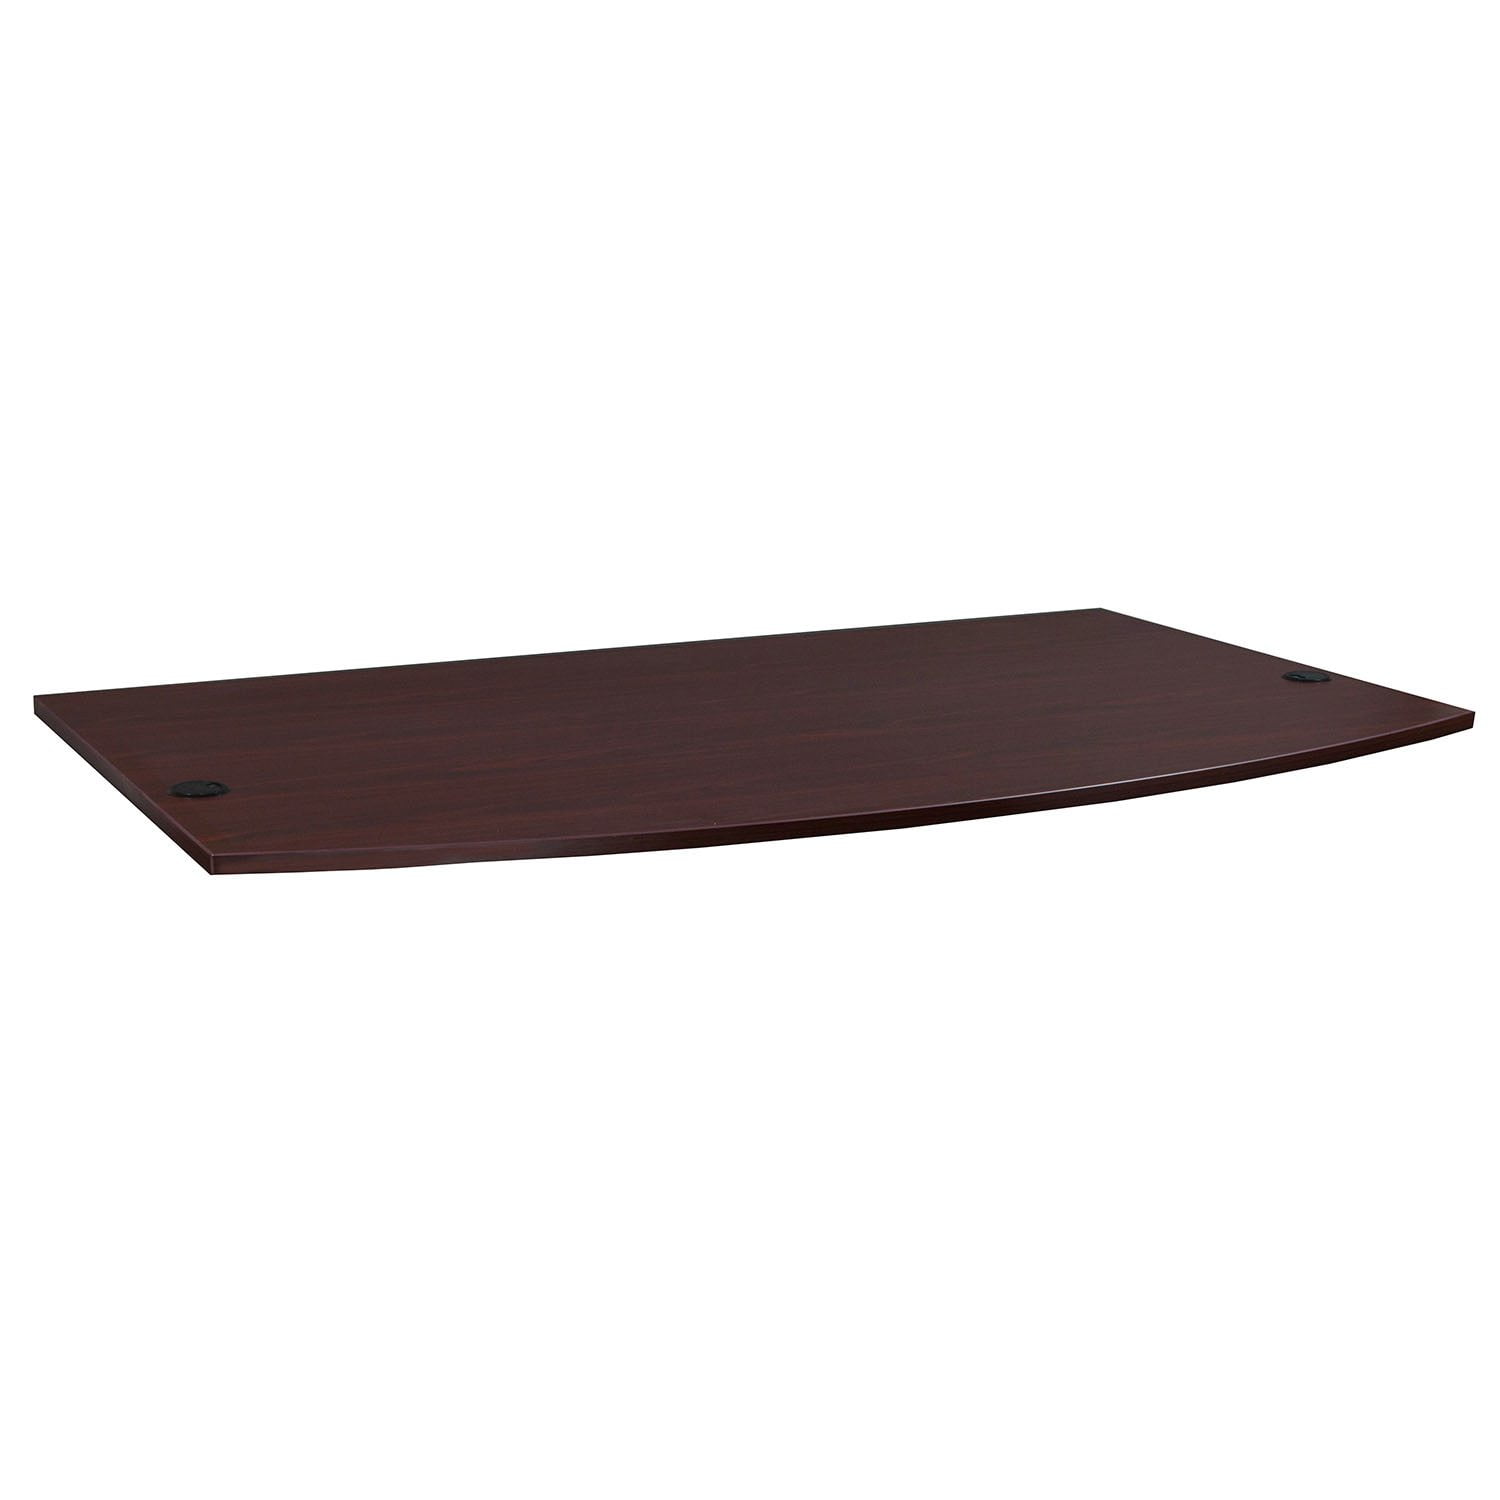 Everyday 36x72 Bow Front Desk Laminate Top Upgrade Only, Mahogany